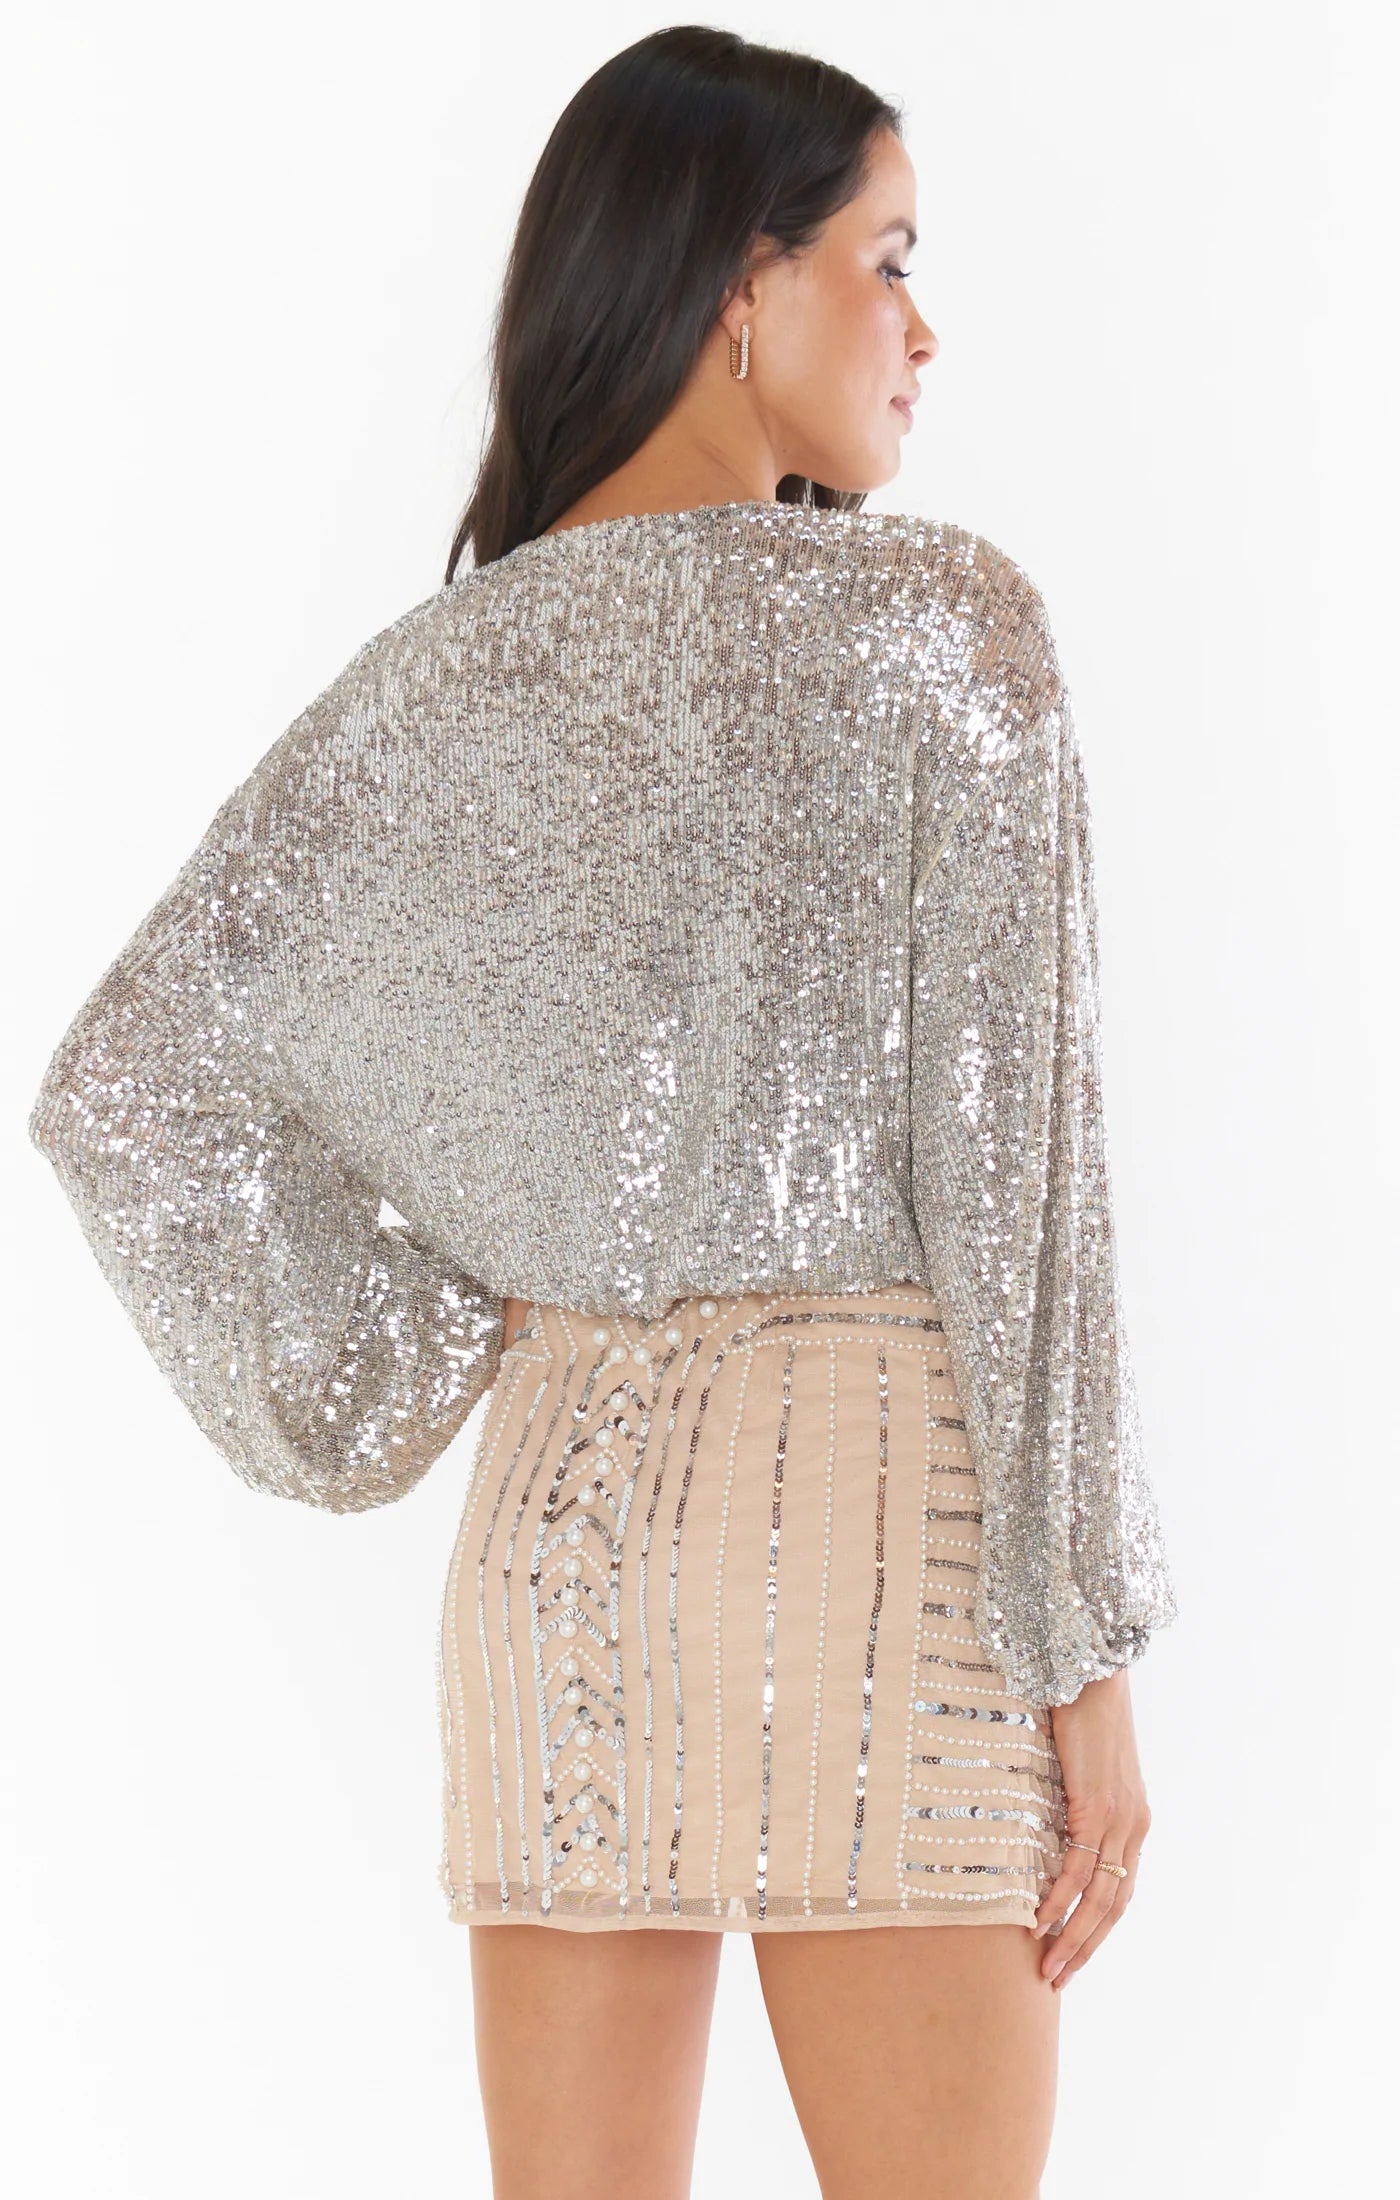 Pearly Skirt - White Pearl Sequins